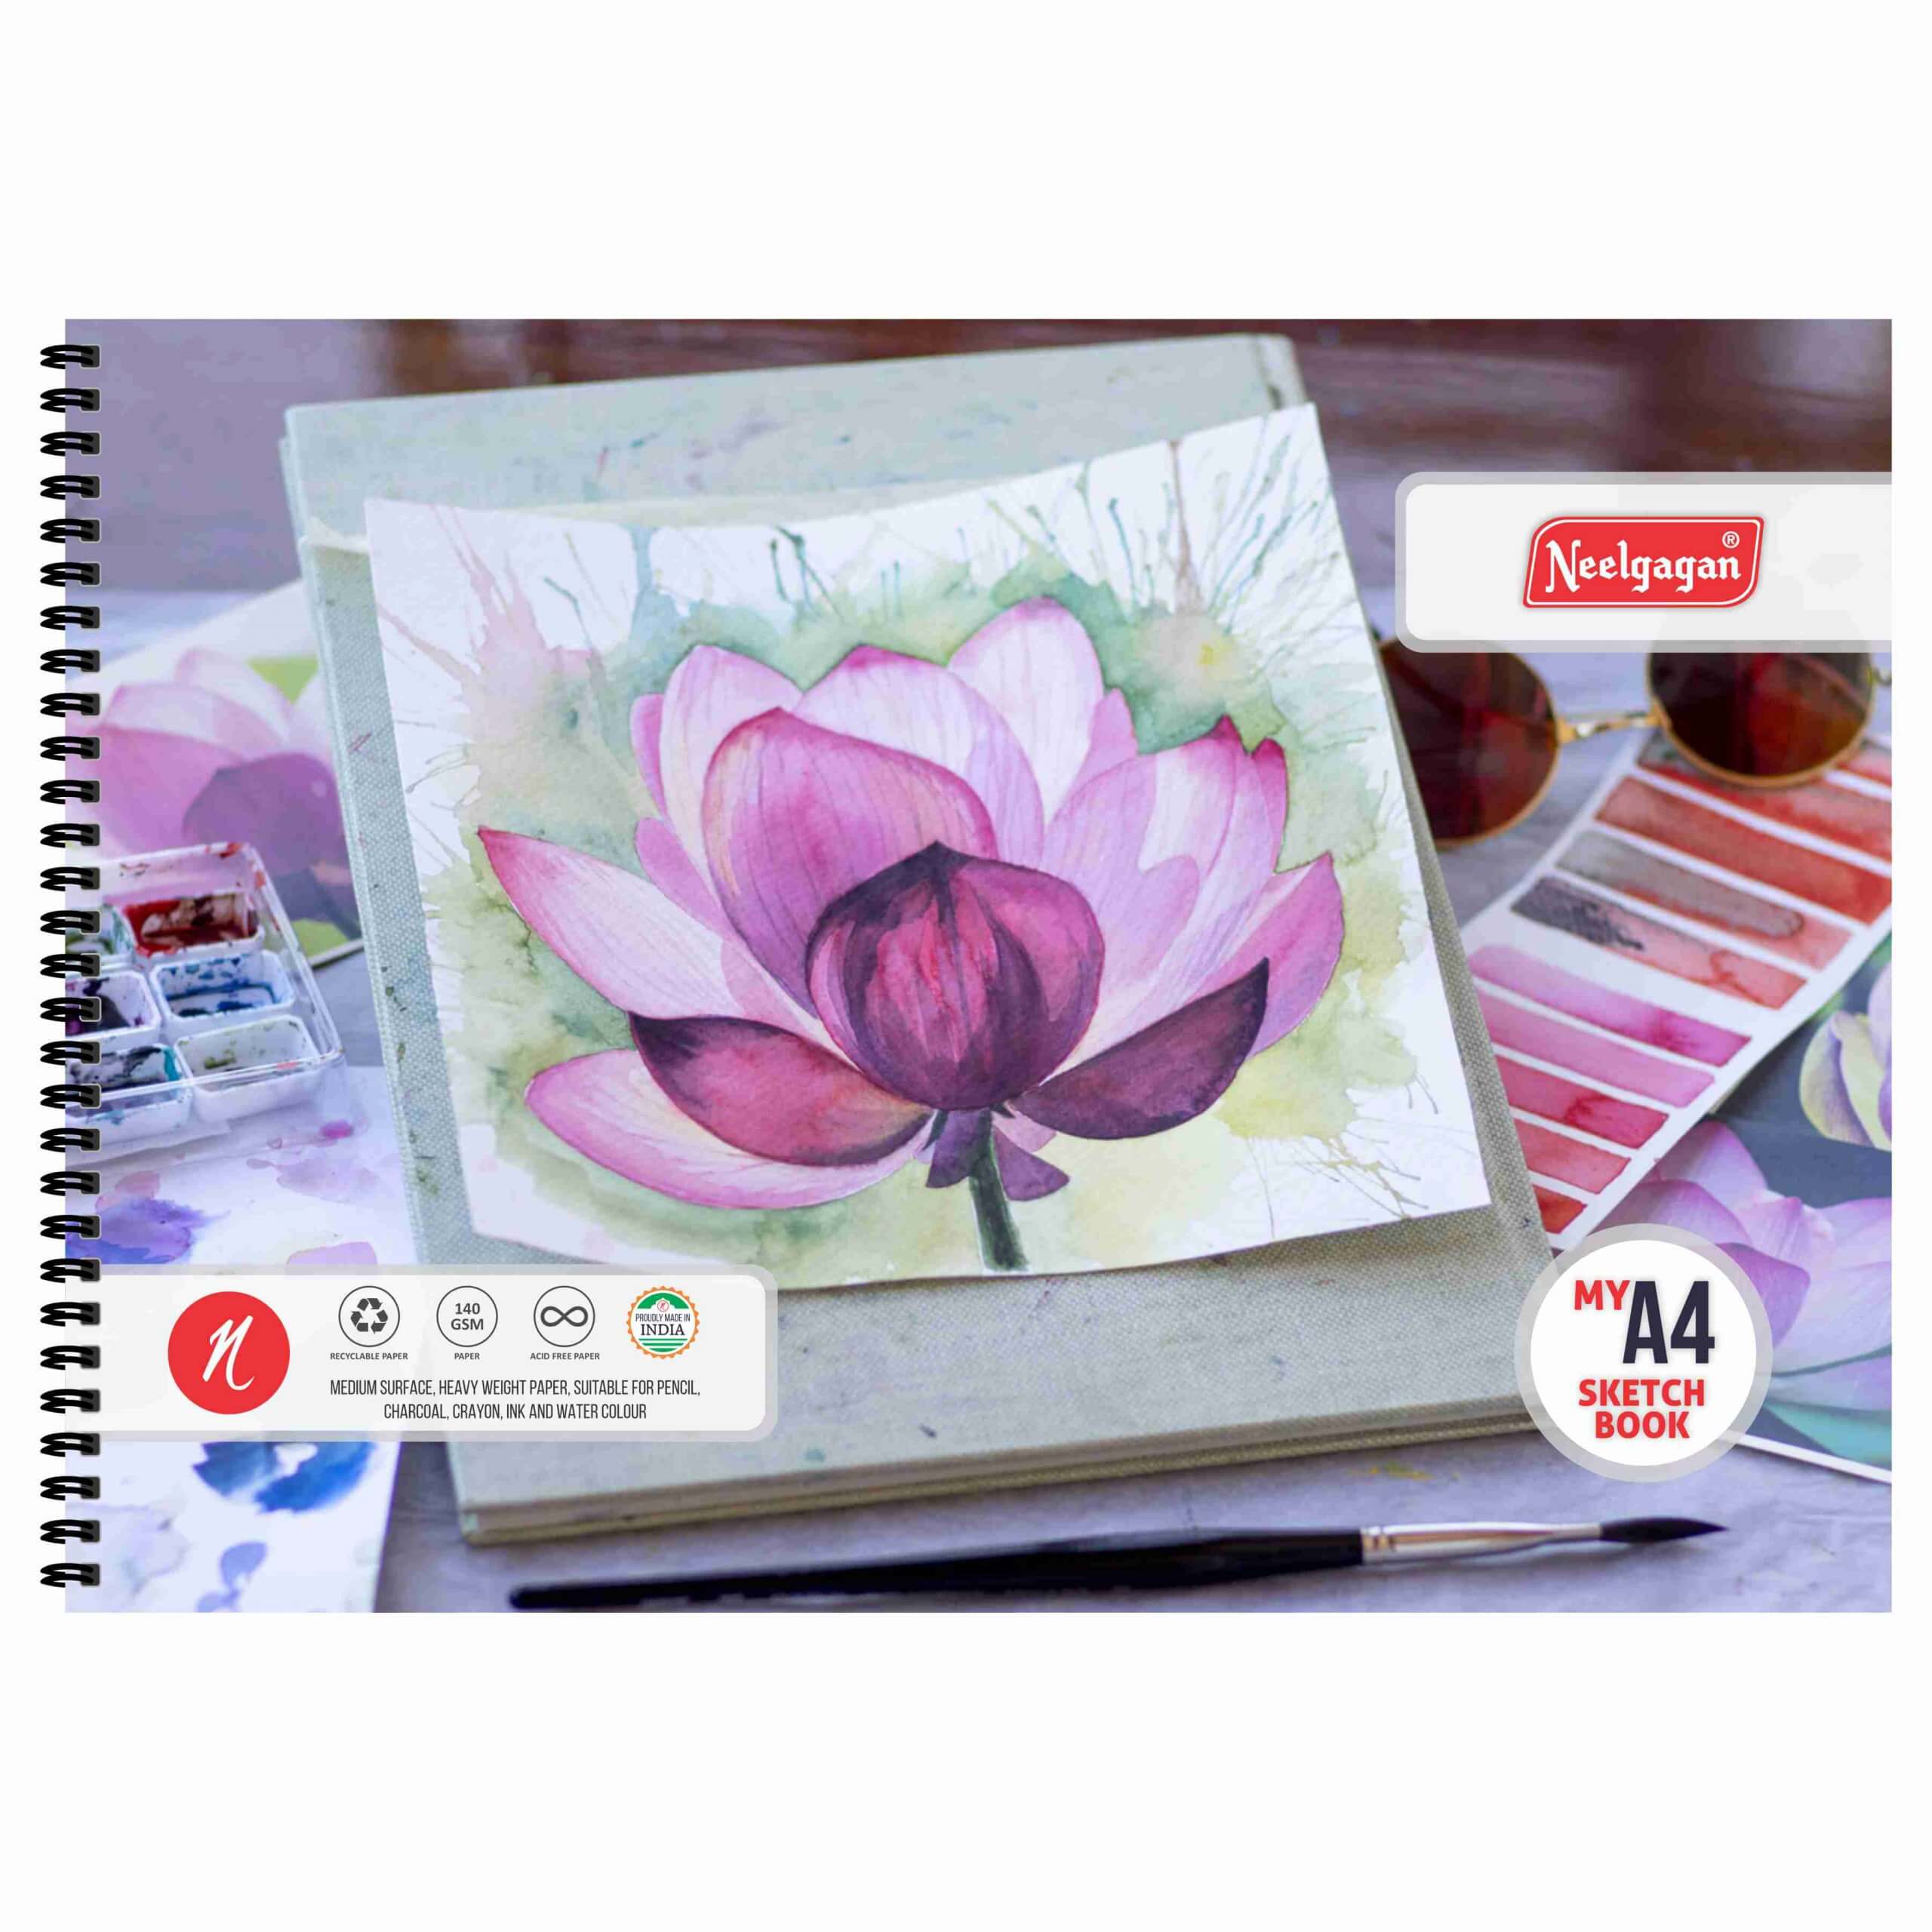 My Sketch Book A4  (25 & 20+20 Sheets) Twin Wiro Bound (White Cartridge 140 GSM) 21 cm x 29.7 cm (Suitable for Drawing & Sketching)